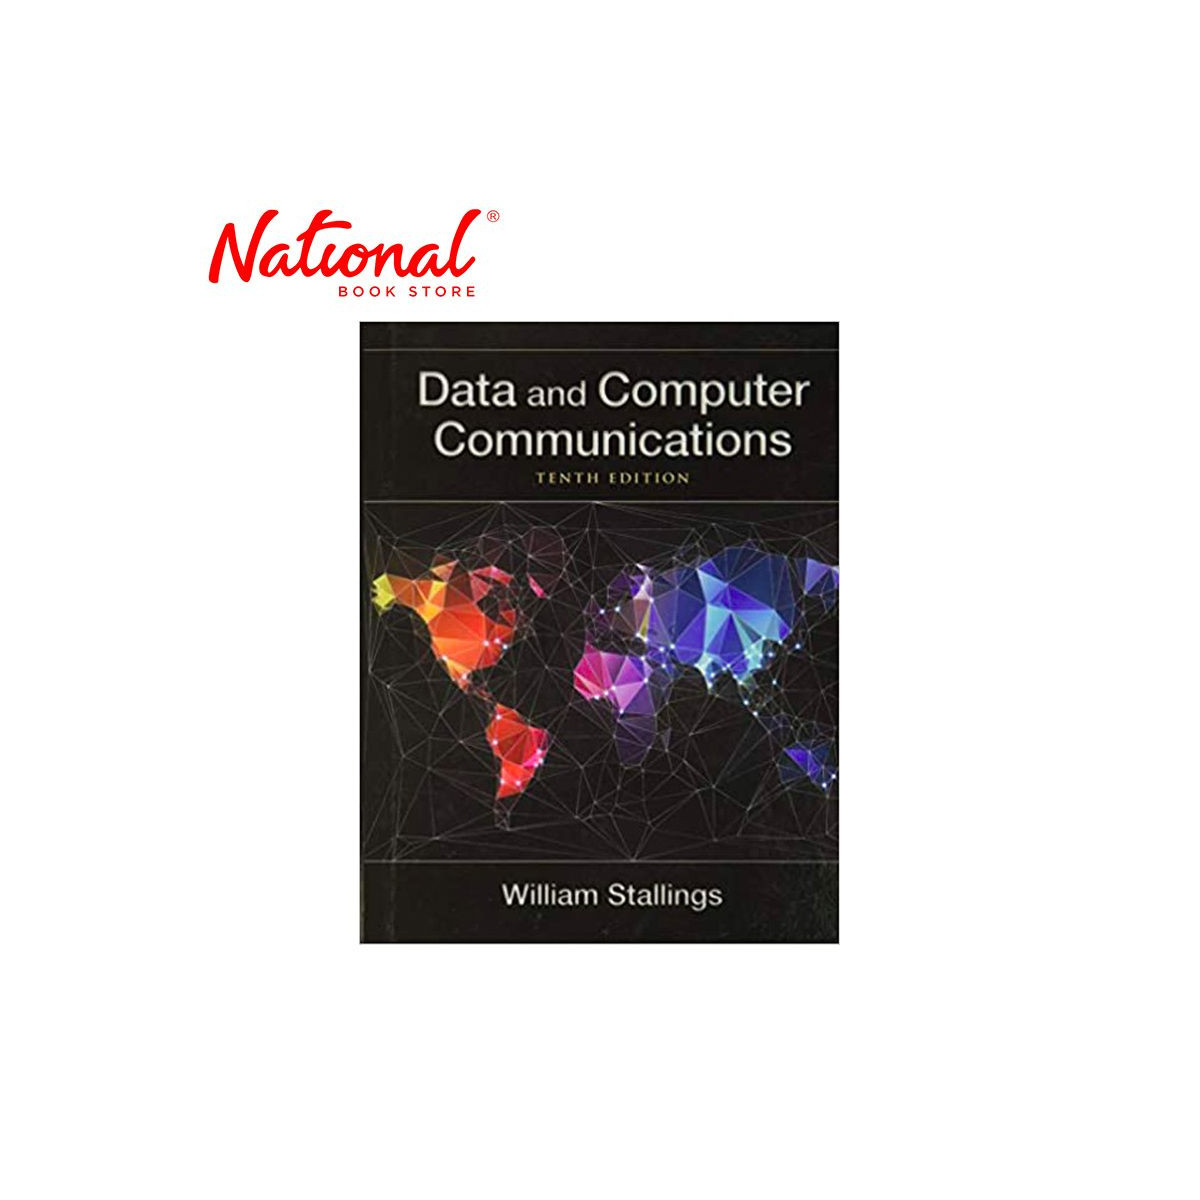 Data And Computer Communications 10th Edition Trade Paperback by William Stallings - College Books